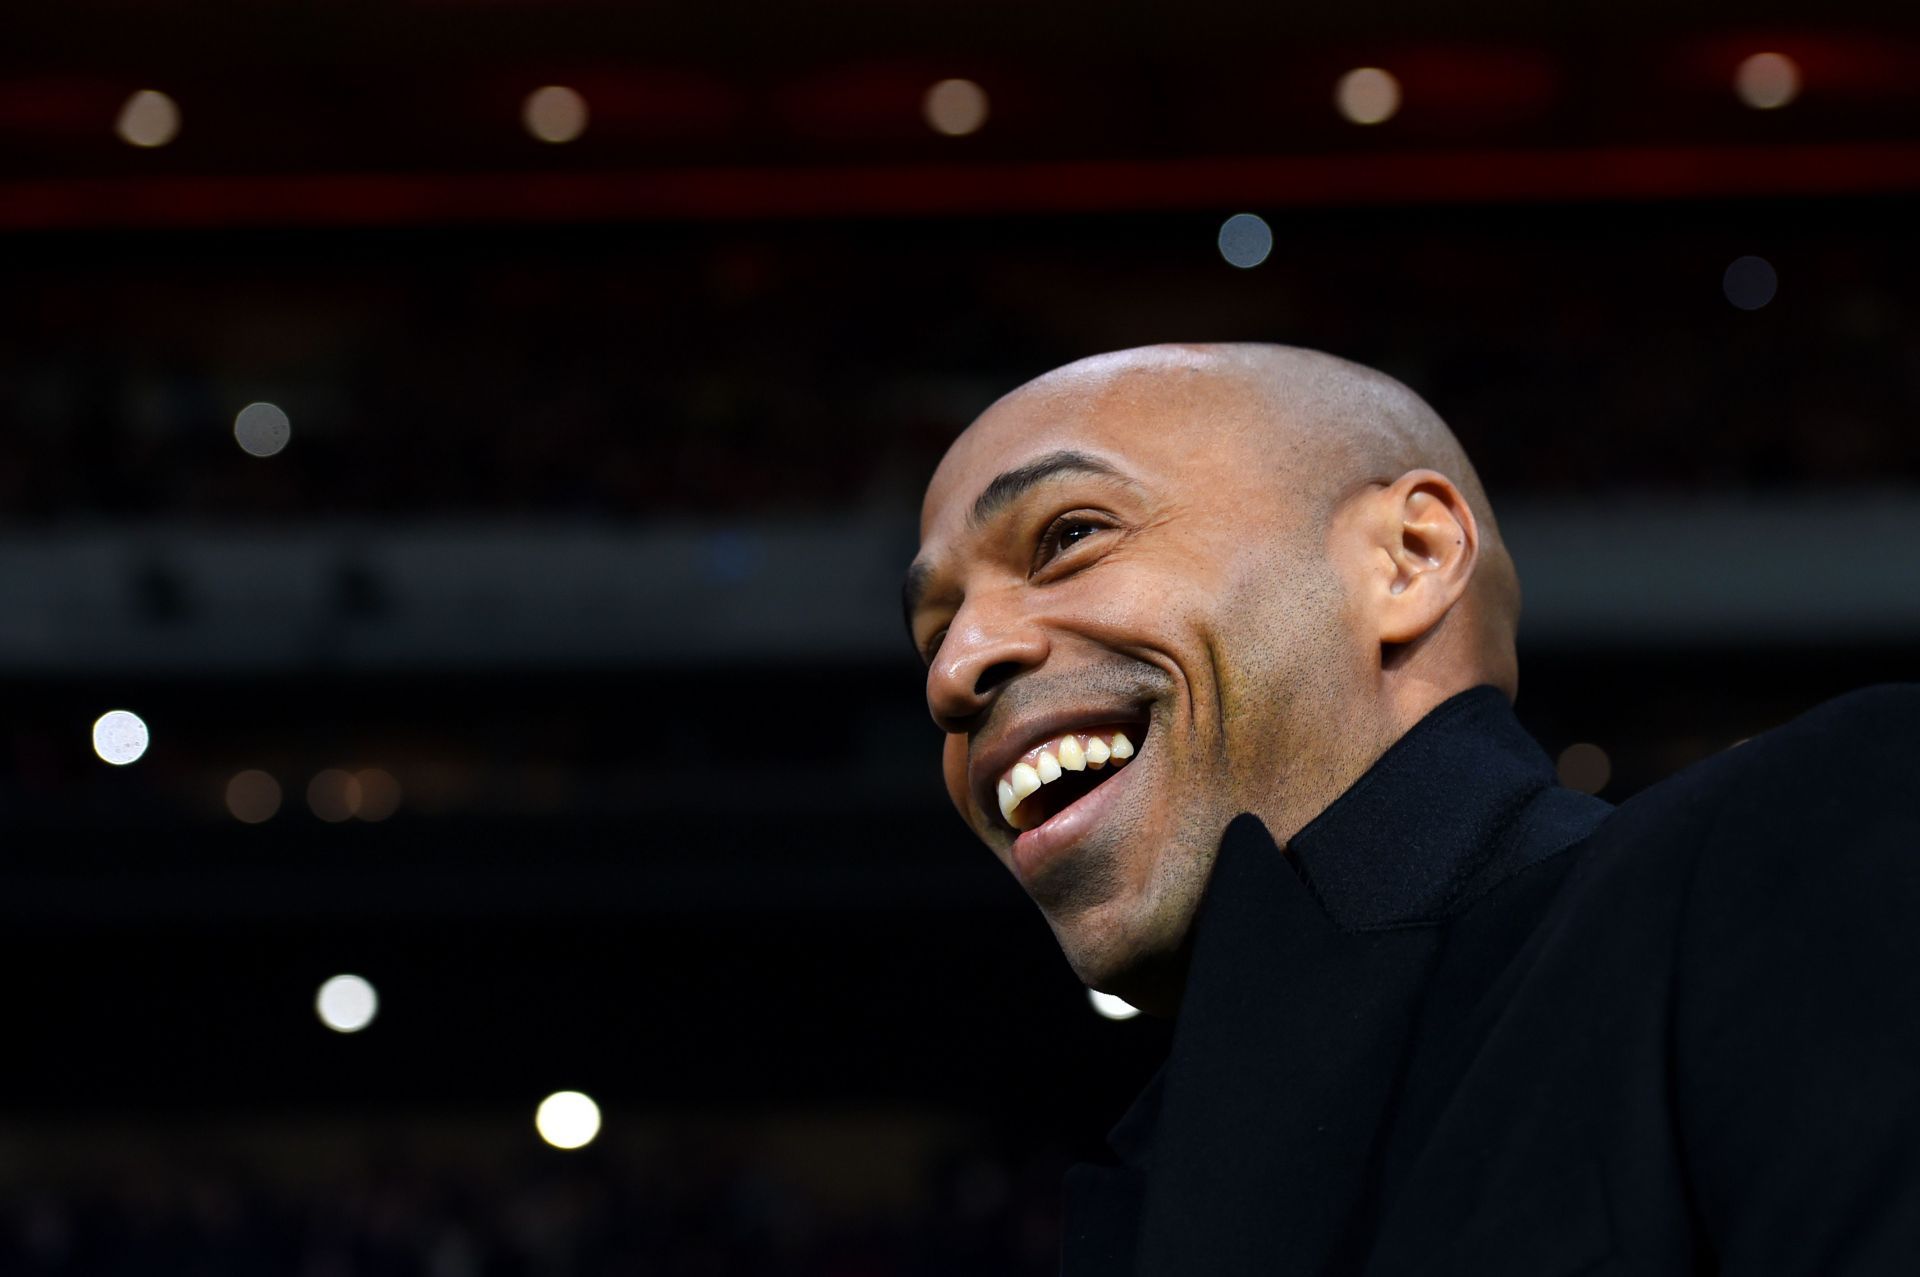 Thierry Henry has put his money on Liverpool in the Champions League final.